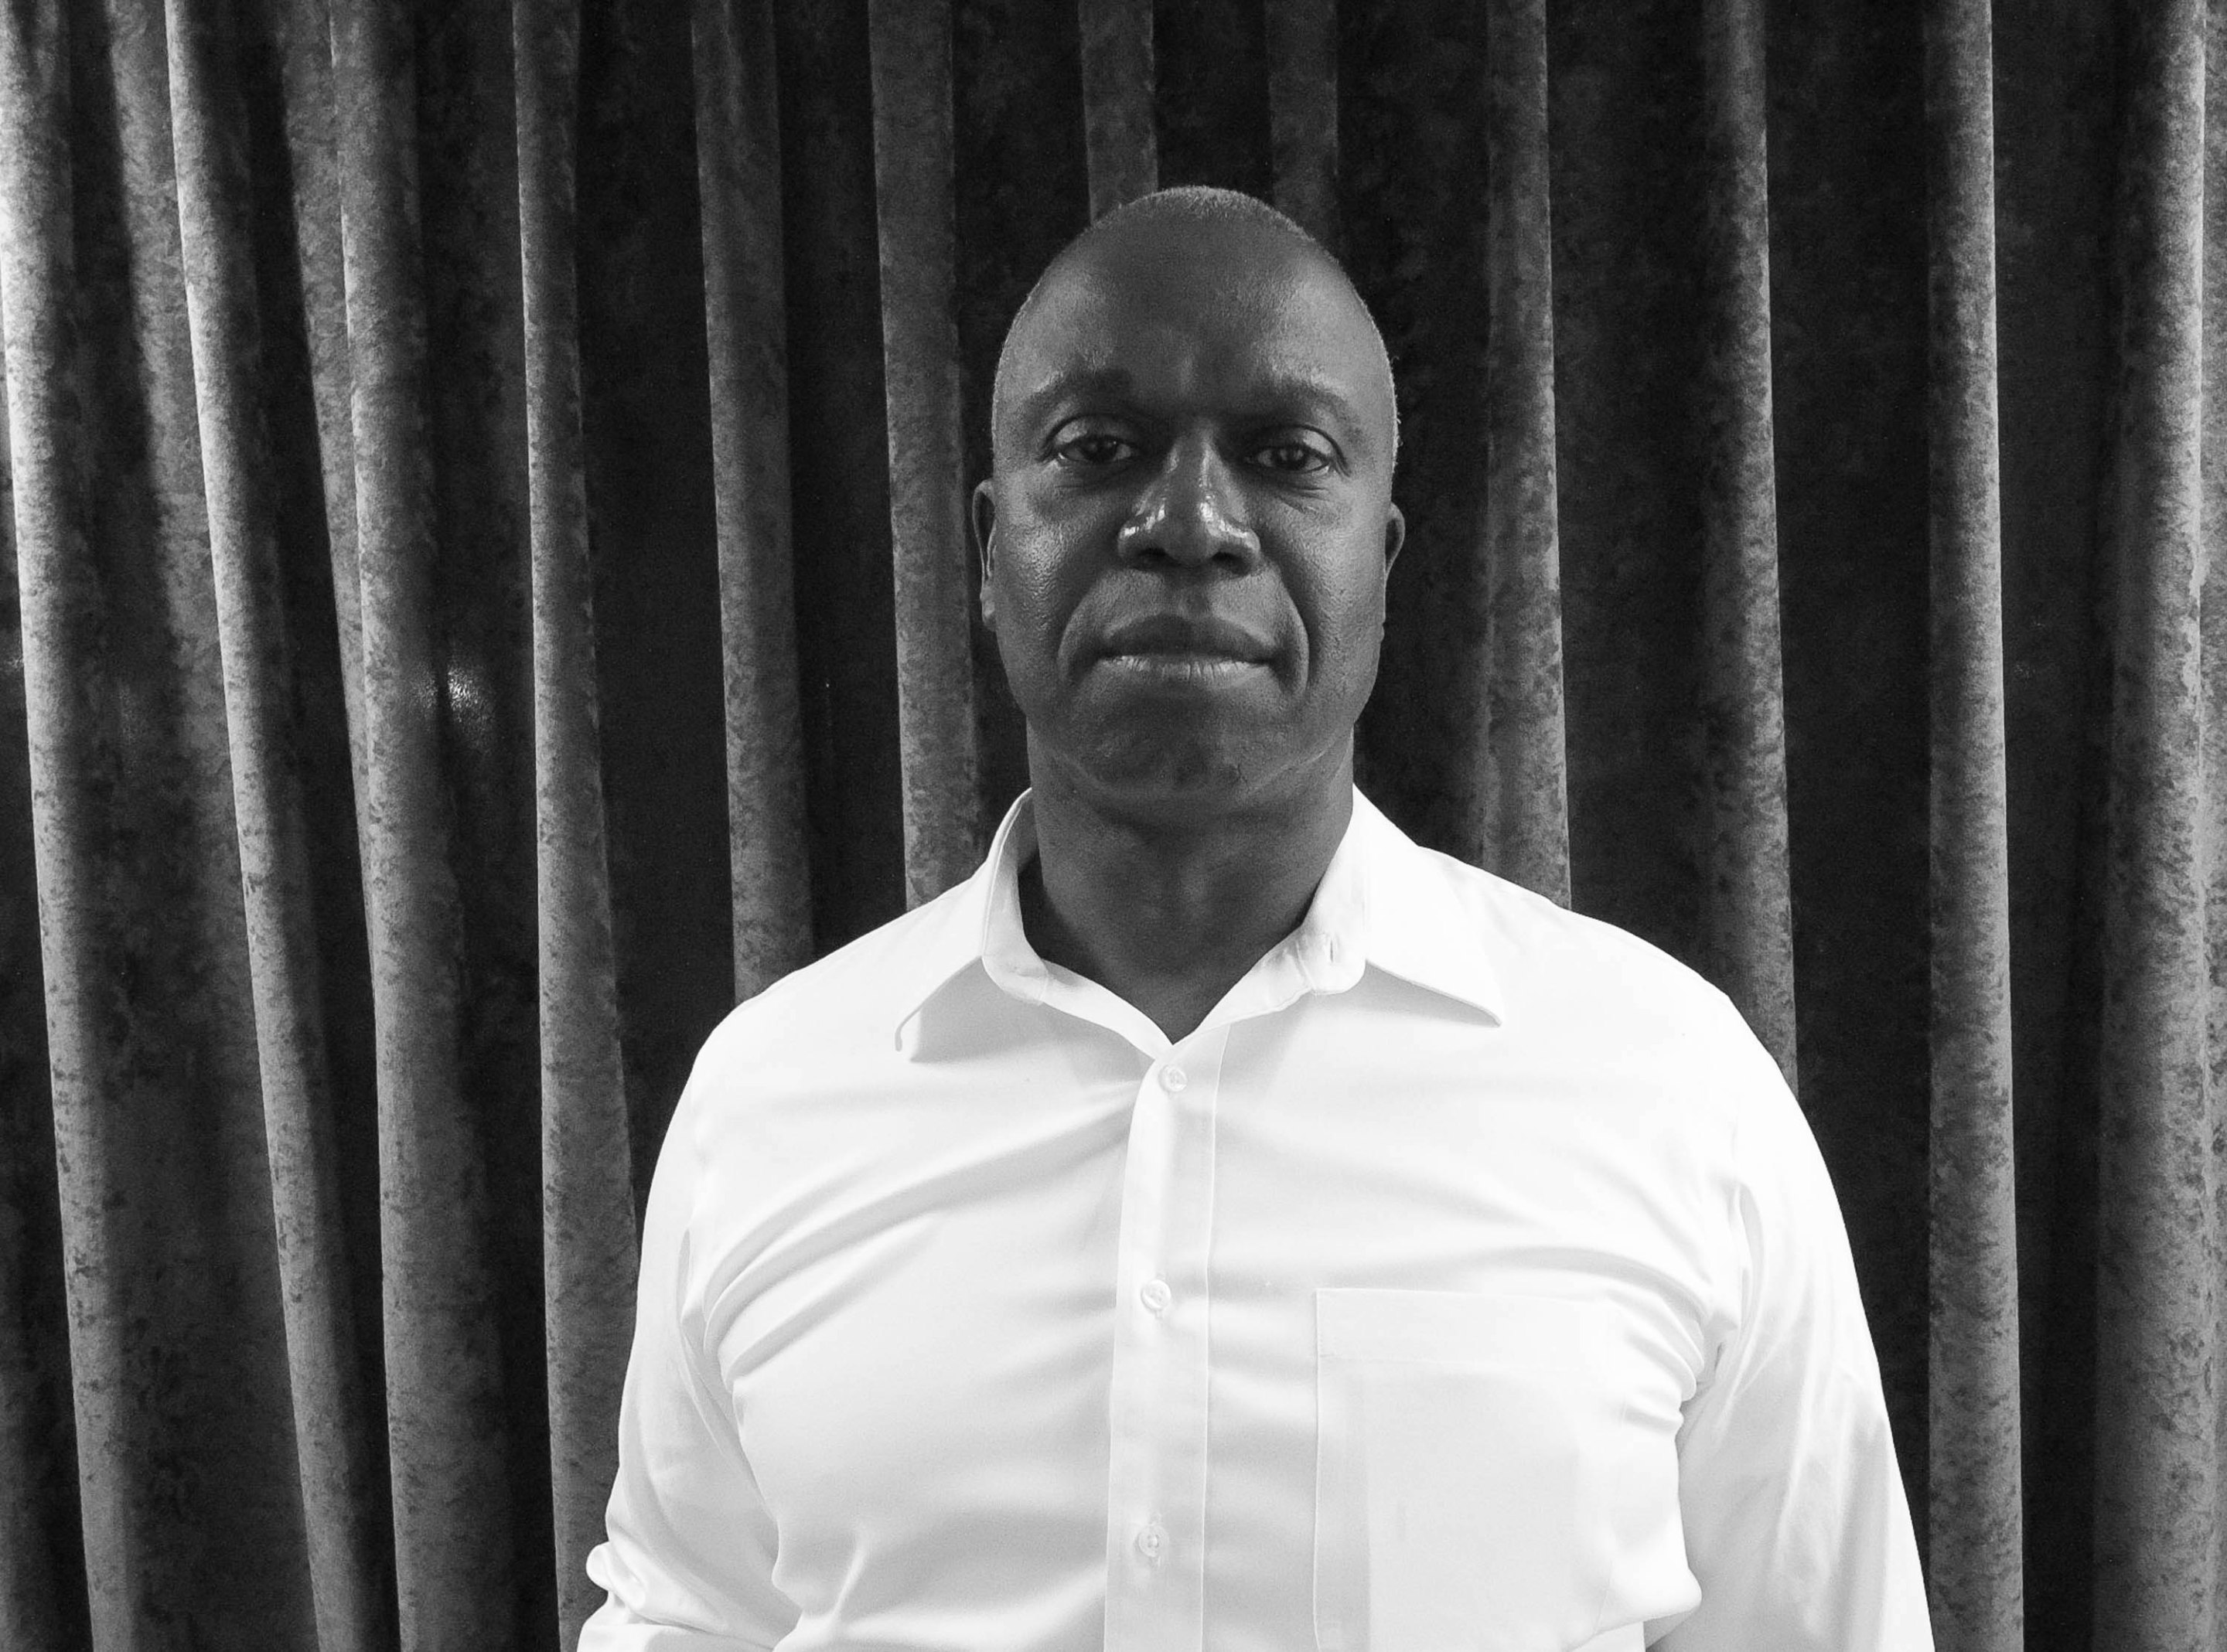 Andre Braugher in a black and white portrait taken in 2015.